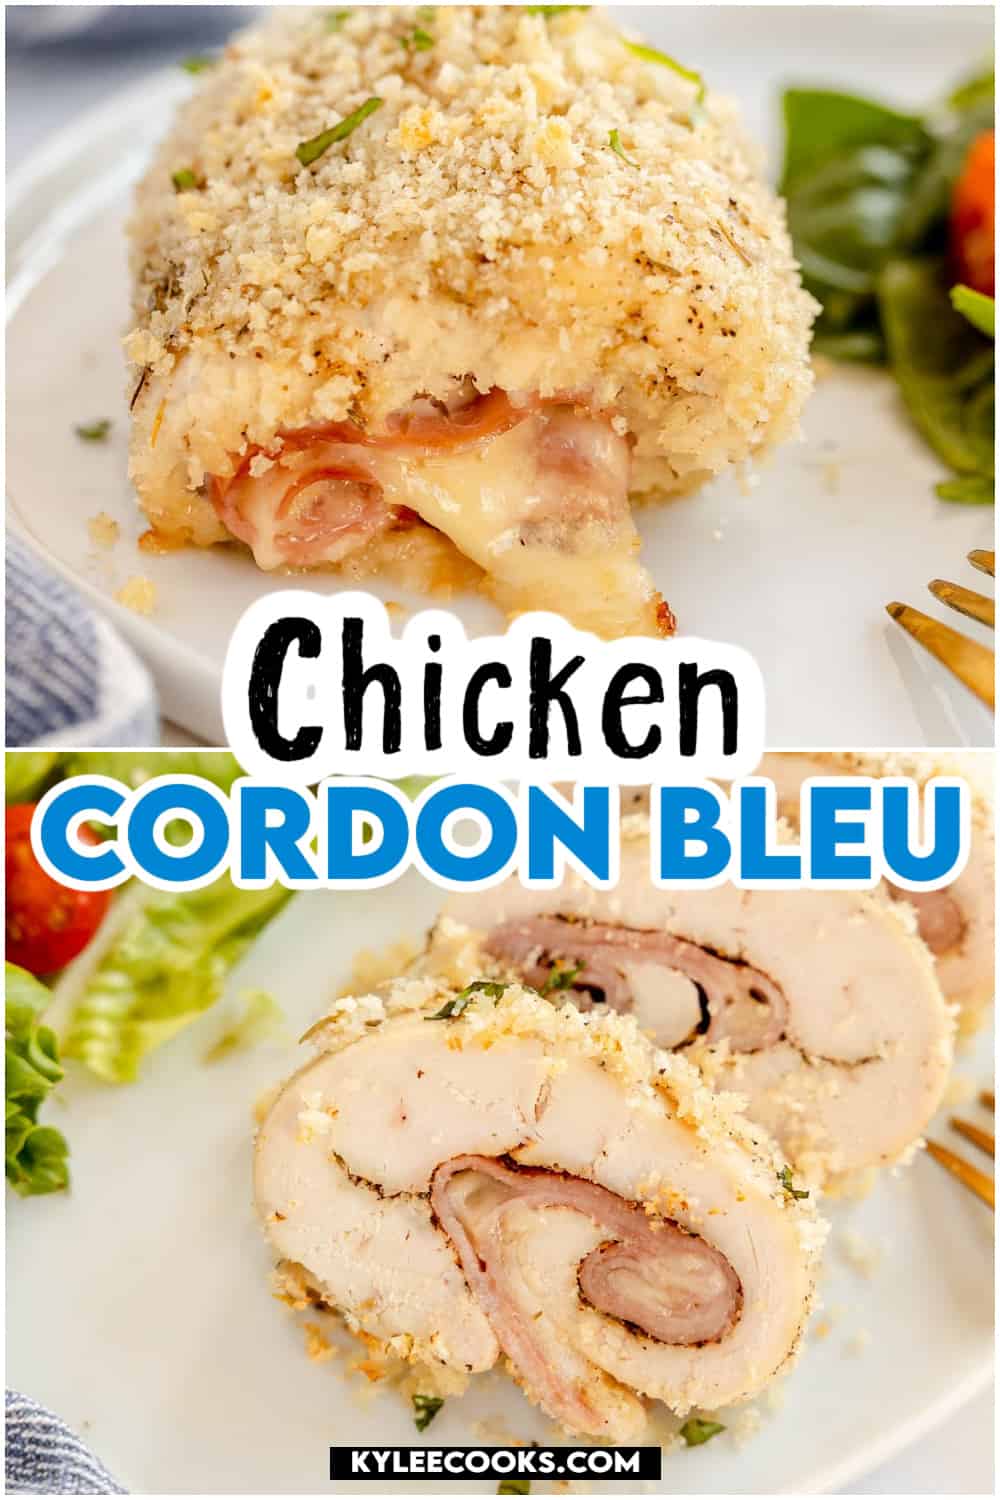 Chicken cordon bleu with salad on a white plate with recipe name and ingredients overlaid in text.